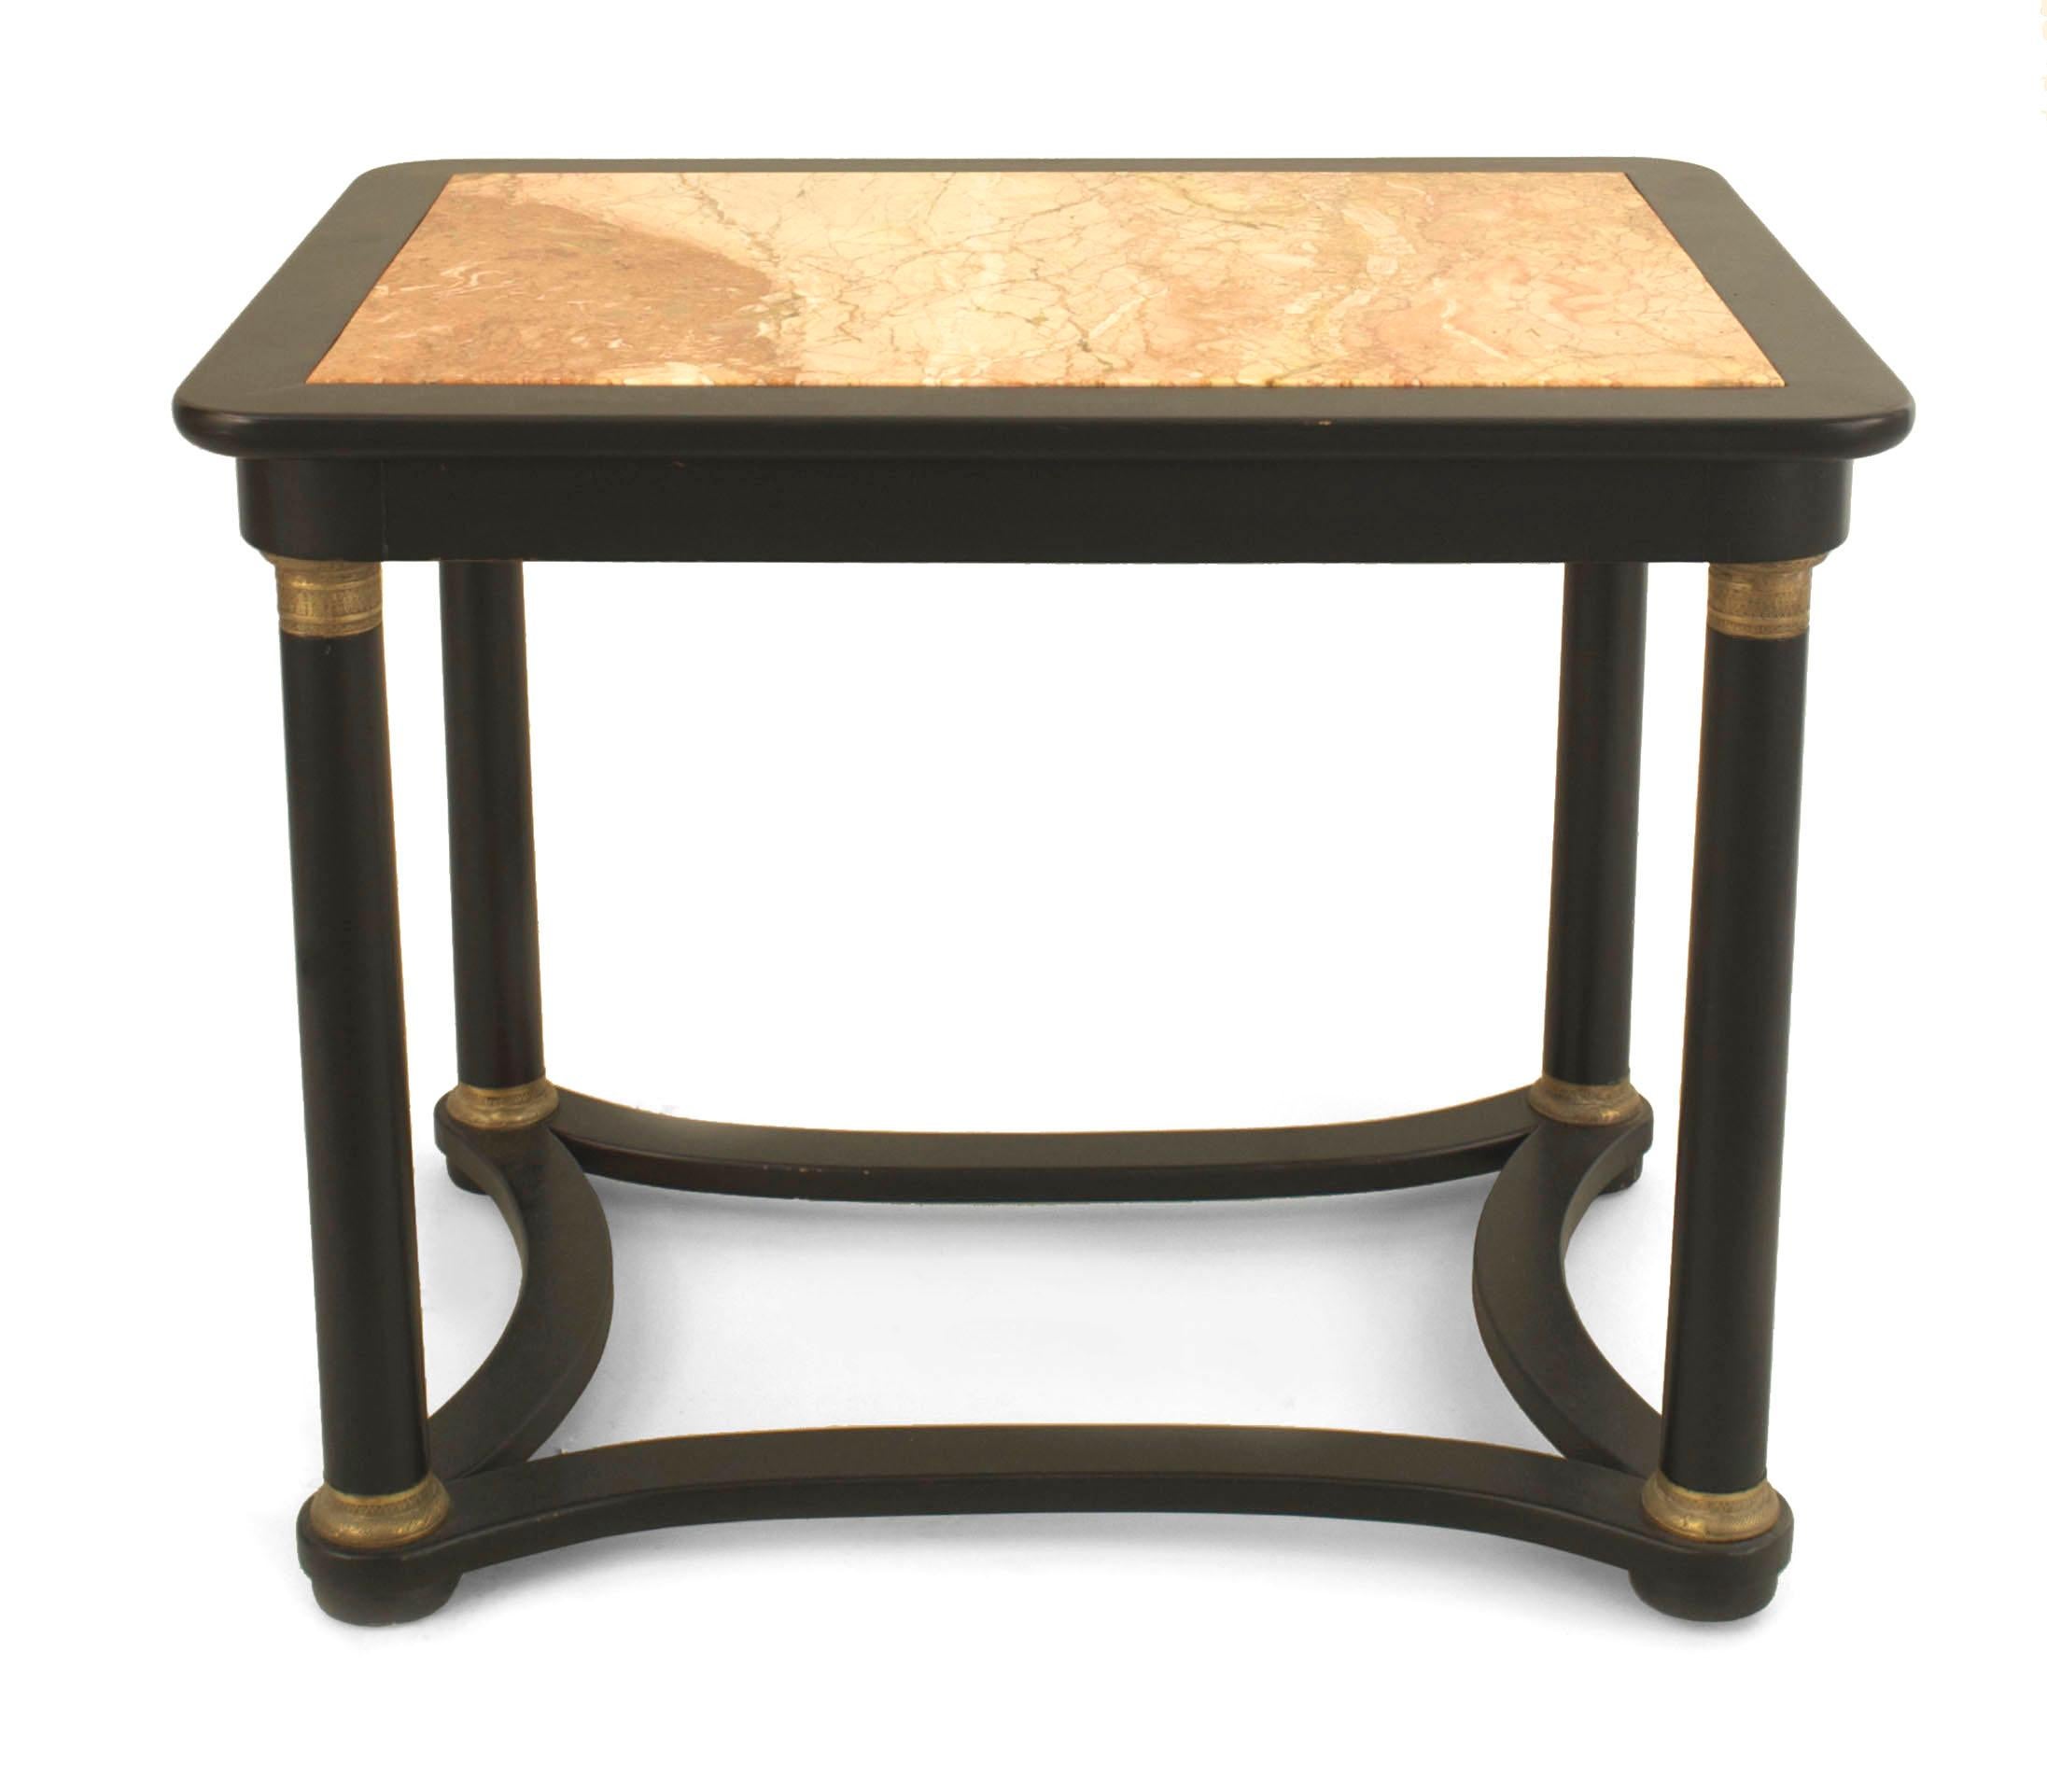 Pair of French 1940s (Regency style) ebonized and gilt trimmed rectangular low end tables with four cylindrical legs connected by a shaped stretcher with an inset marble top attributed: Jansen.

Maison Jansen was a Paris-based interior